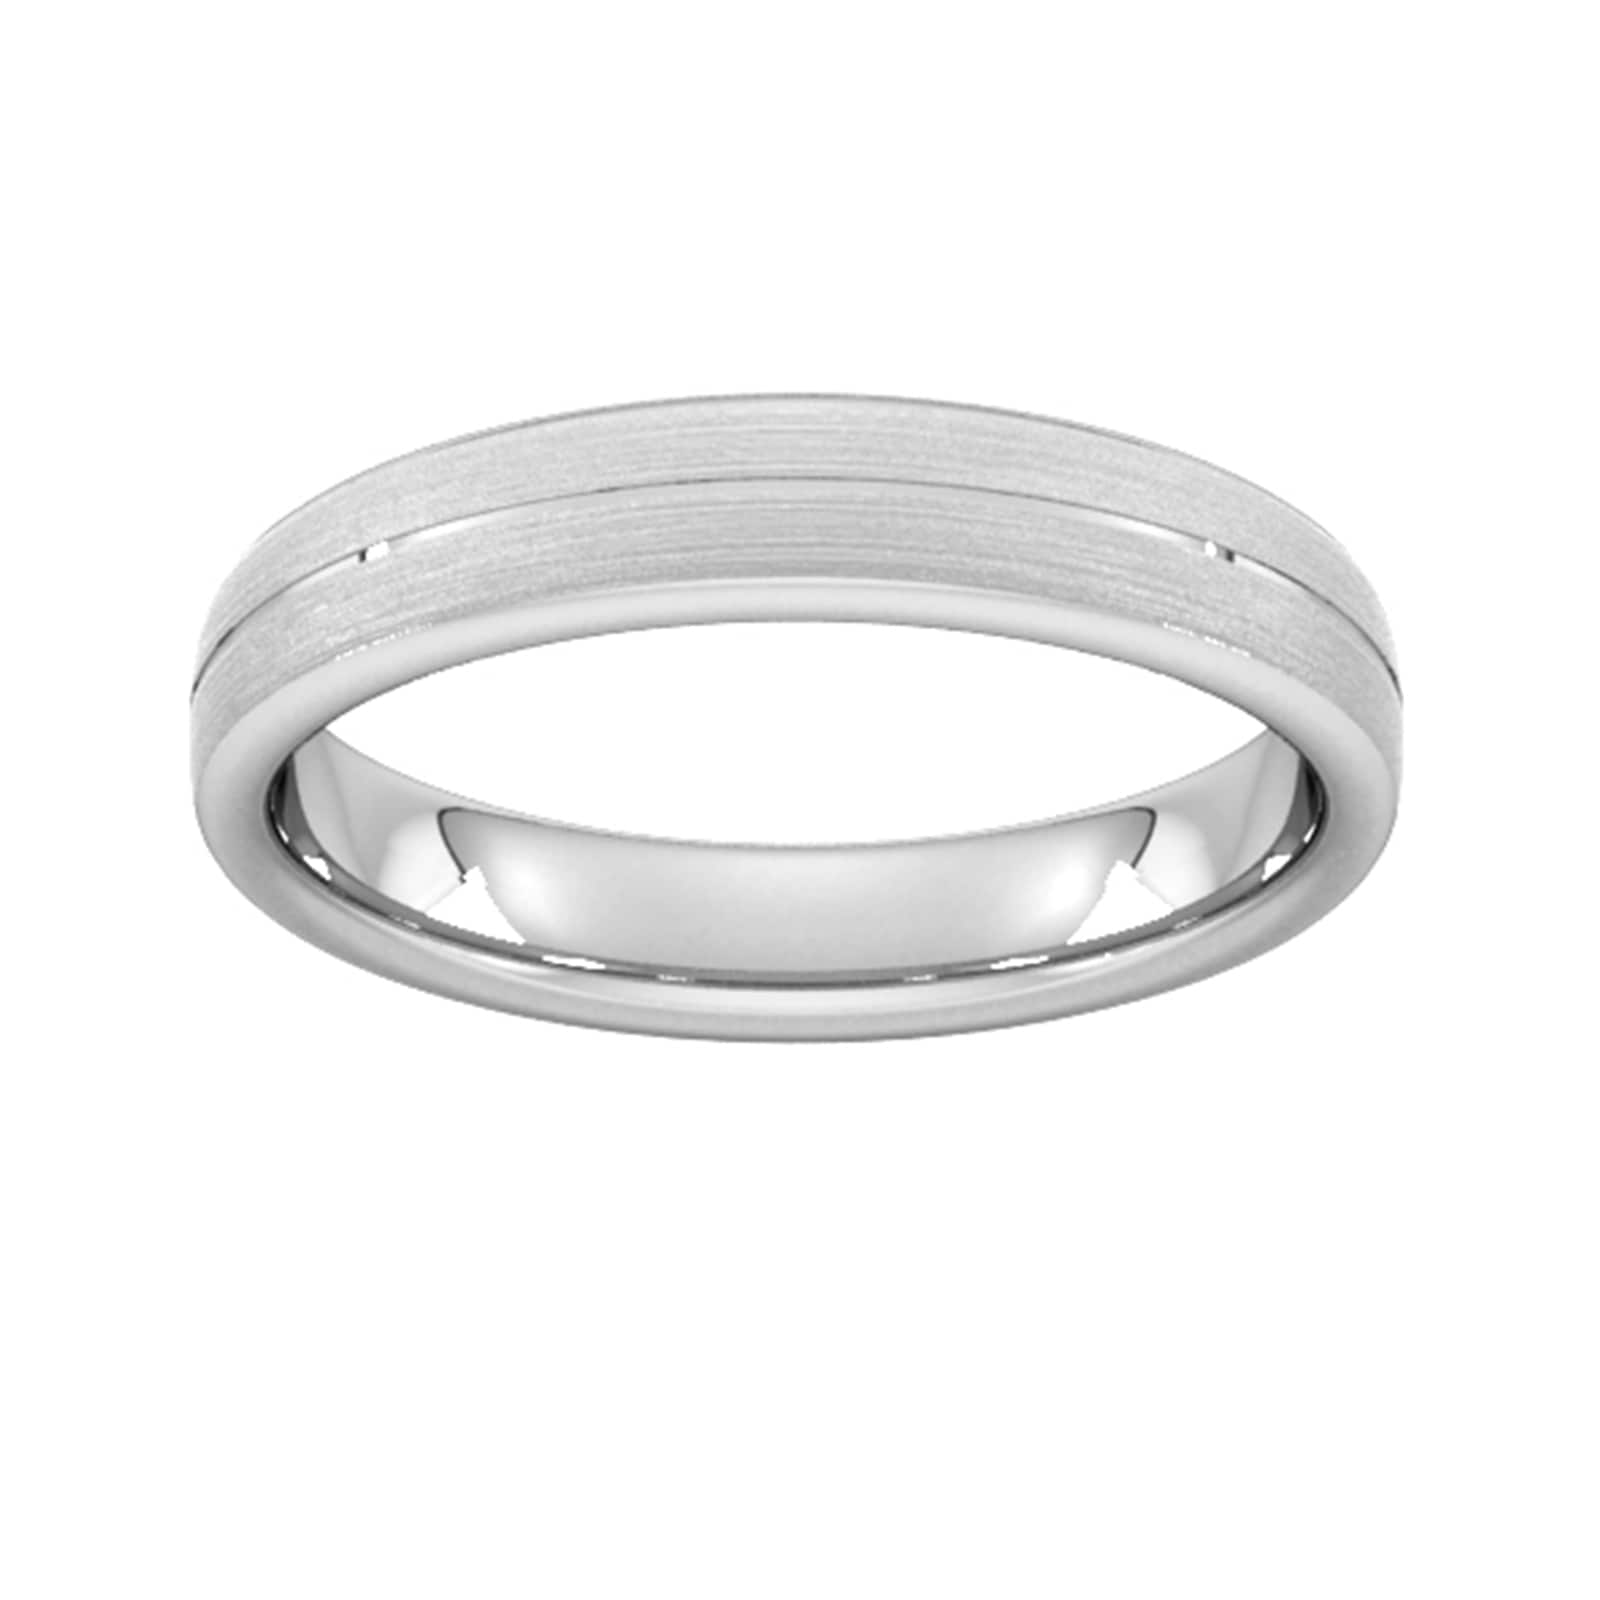 4mm Slight Court Heavy Centre Groove With Chamfered Edge Wedding Ring In 9 Carat White Gold - Ring Size S